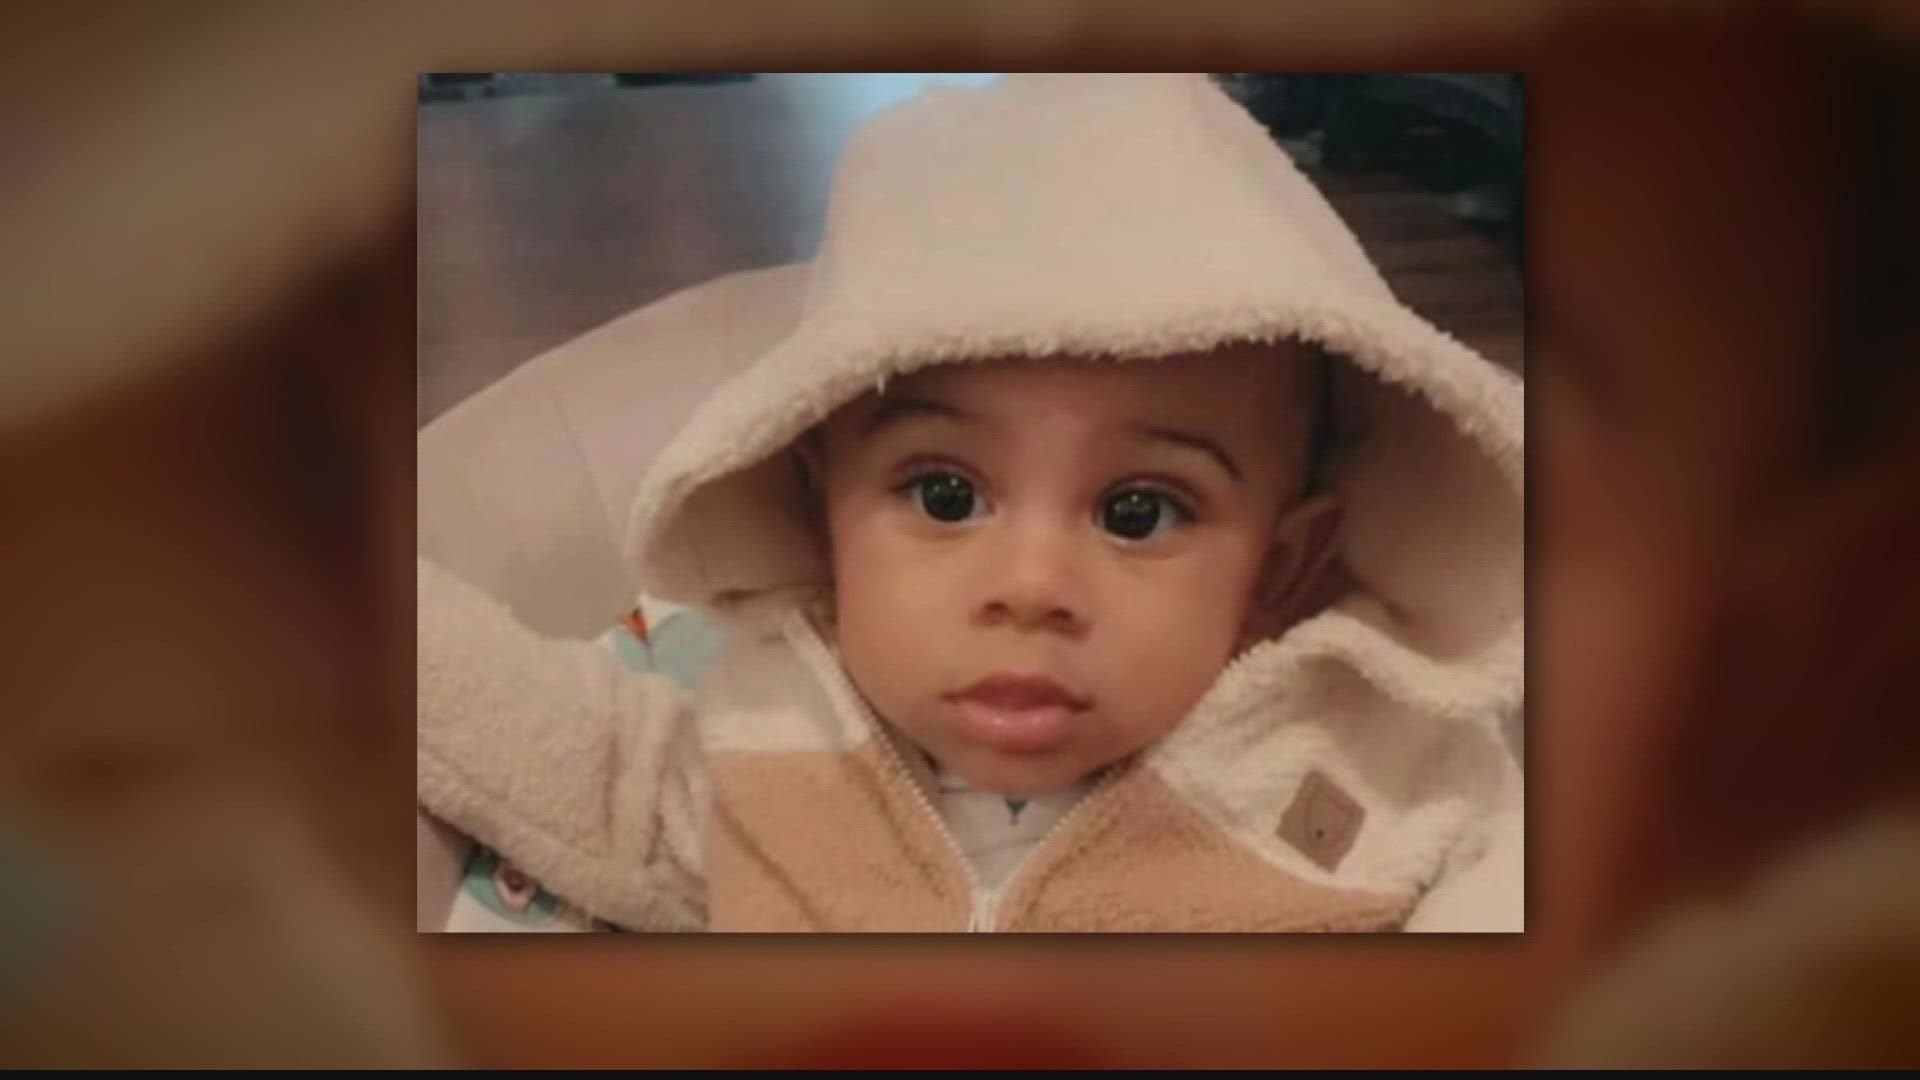 Shortly before 3 p.m. on Monday, 6-month-old Grayson Fleming was shot and killed near Atlanta's Anderson Park.